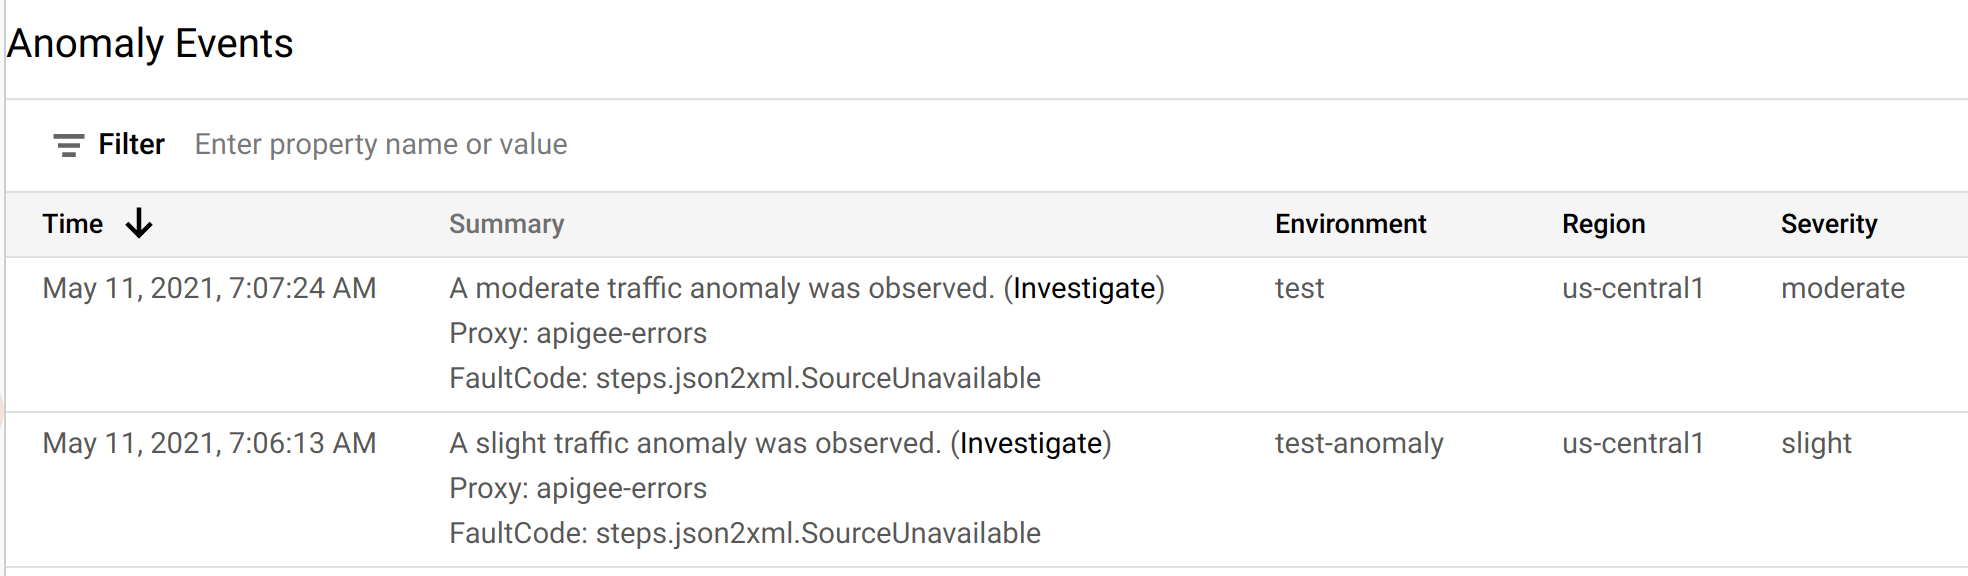 View anomalies in the Anomaly Events dashboard